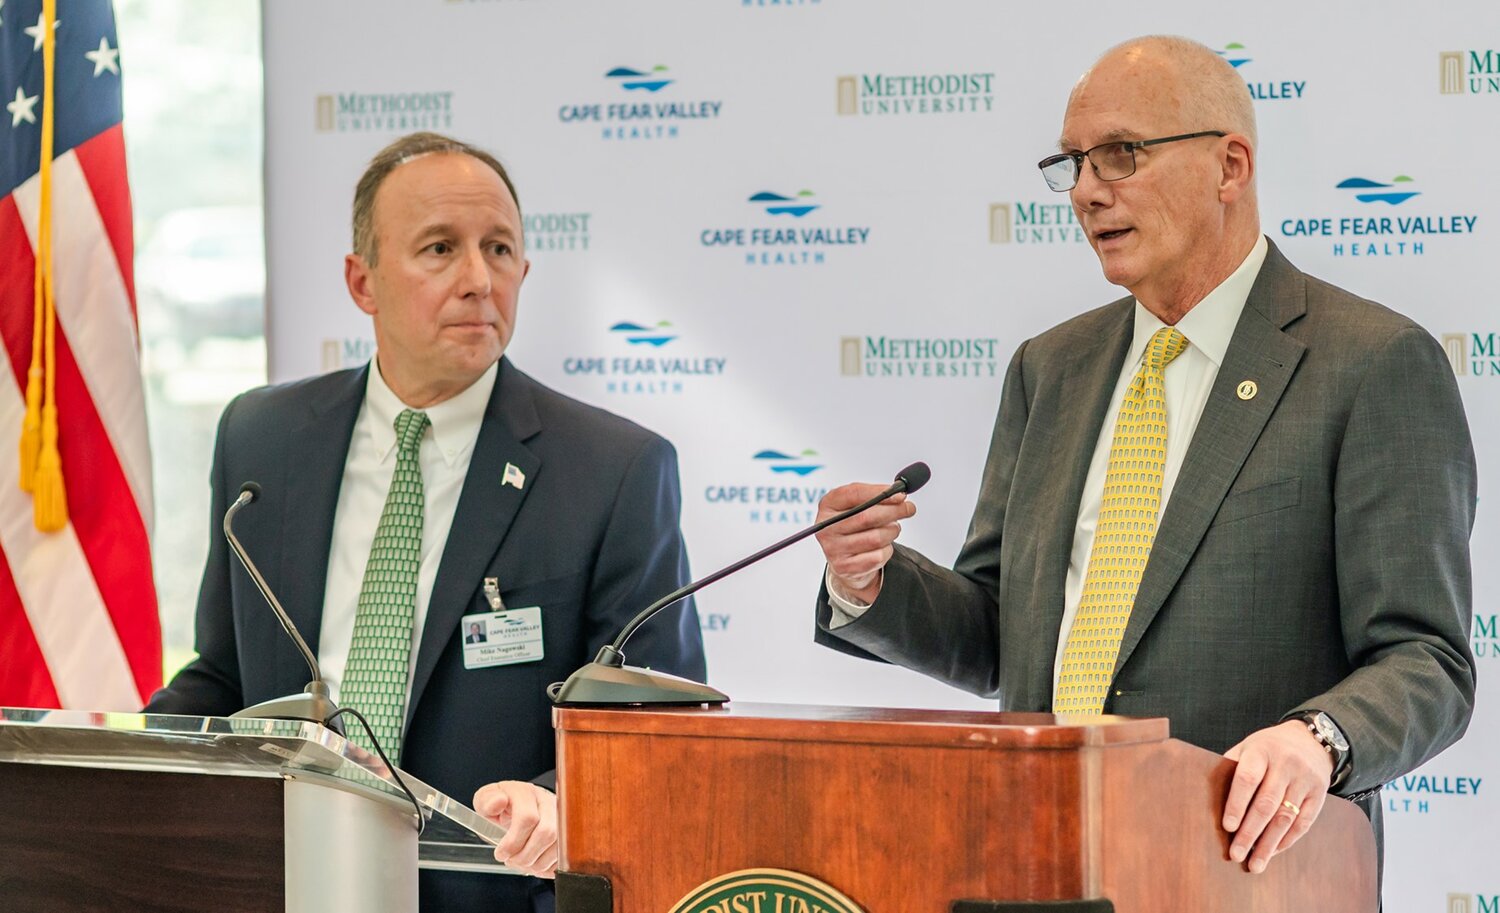 Cape Fear Valley Health CEO Michael Nagowski, left, and Methodist University President Stanley T. Wearden speak during February's announcement of a proposed medical school.